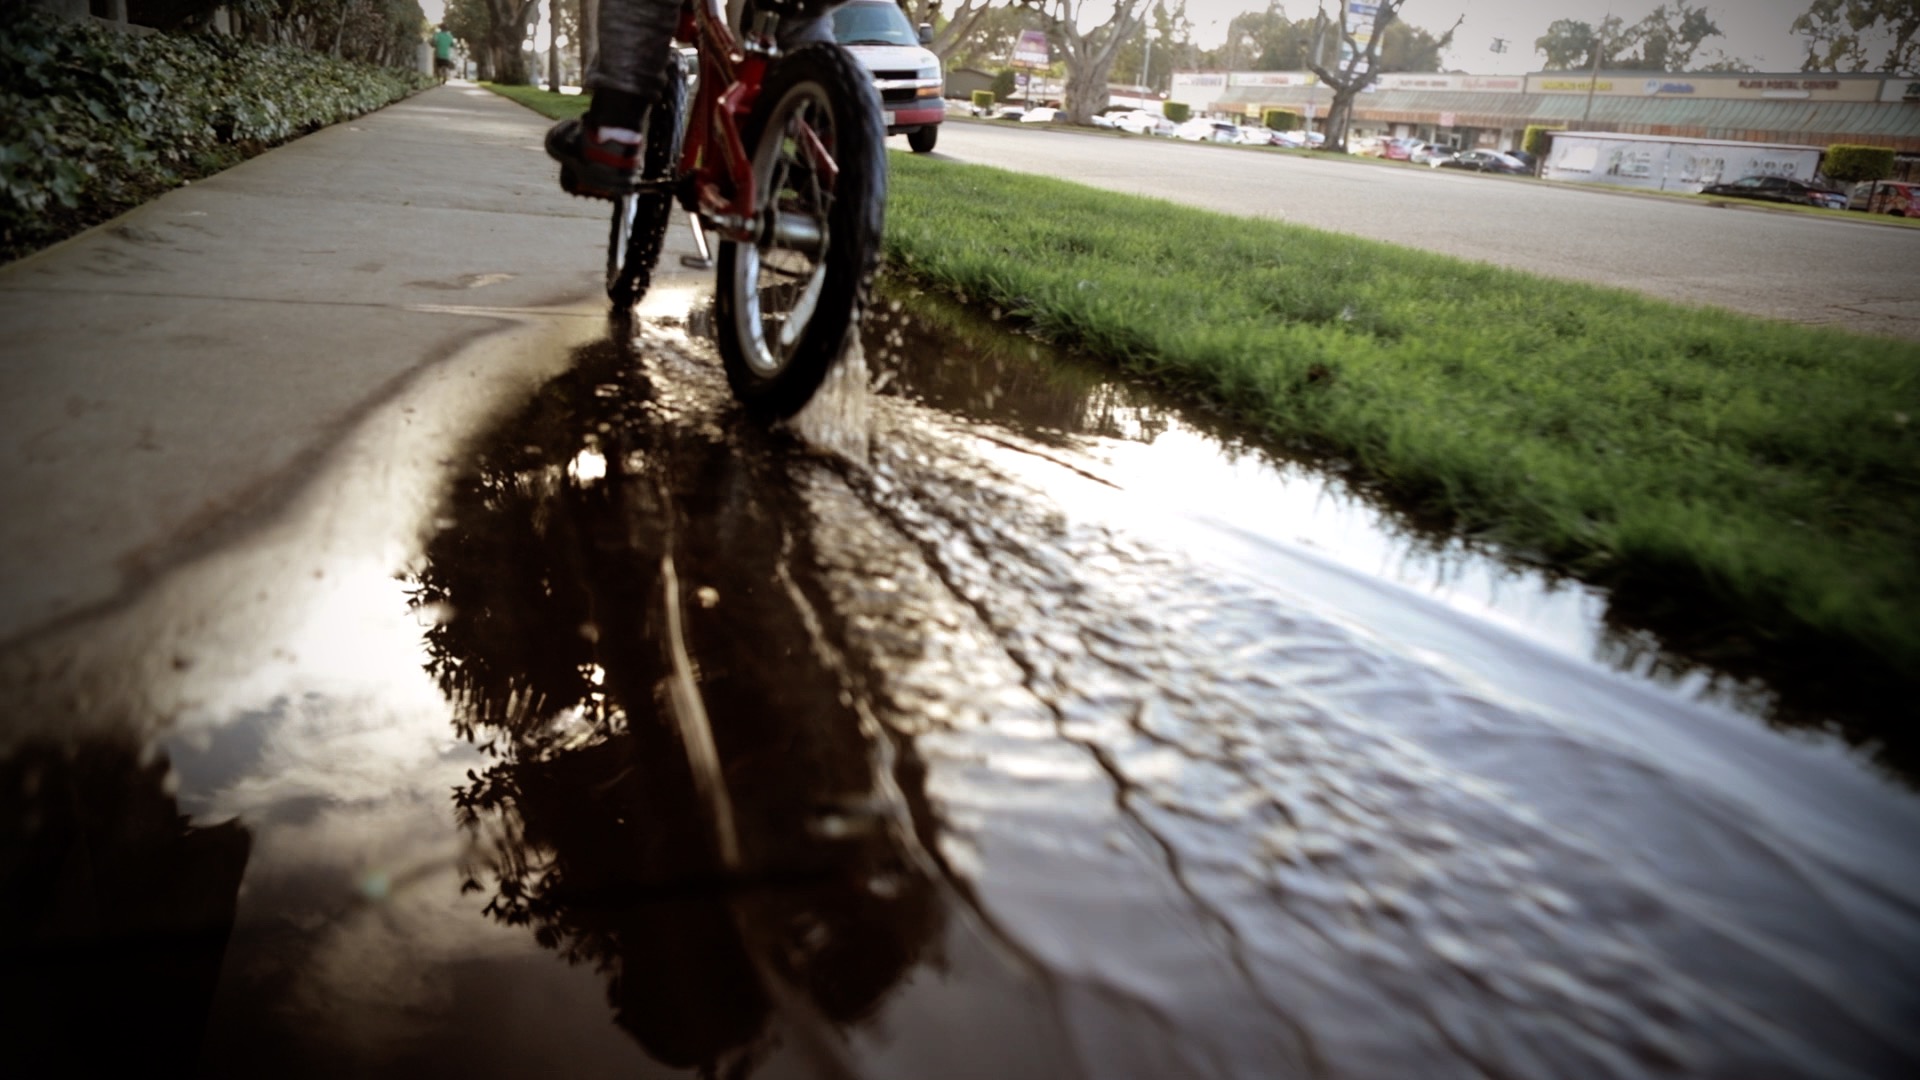 the wheels of a bike going through a puddle